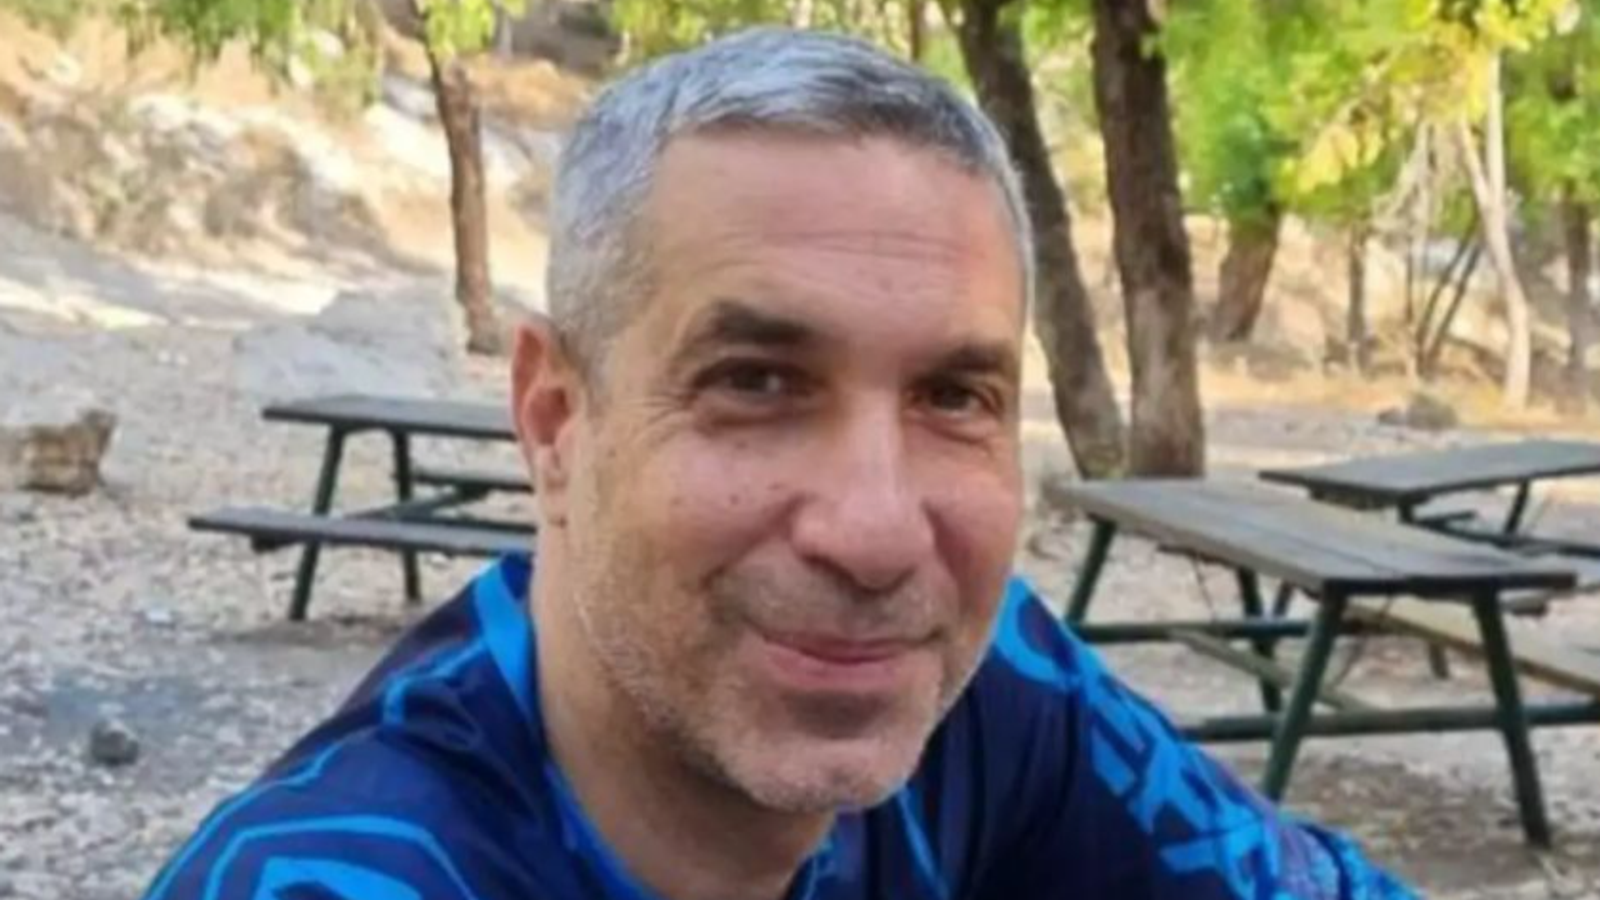 Body of Israeli hostage kidnapped during cycling trip on 7 October found in Gaza, IDF says